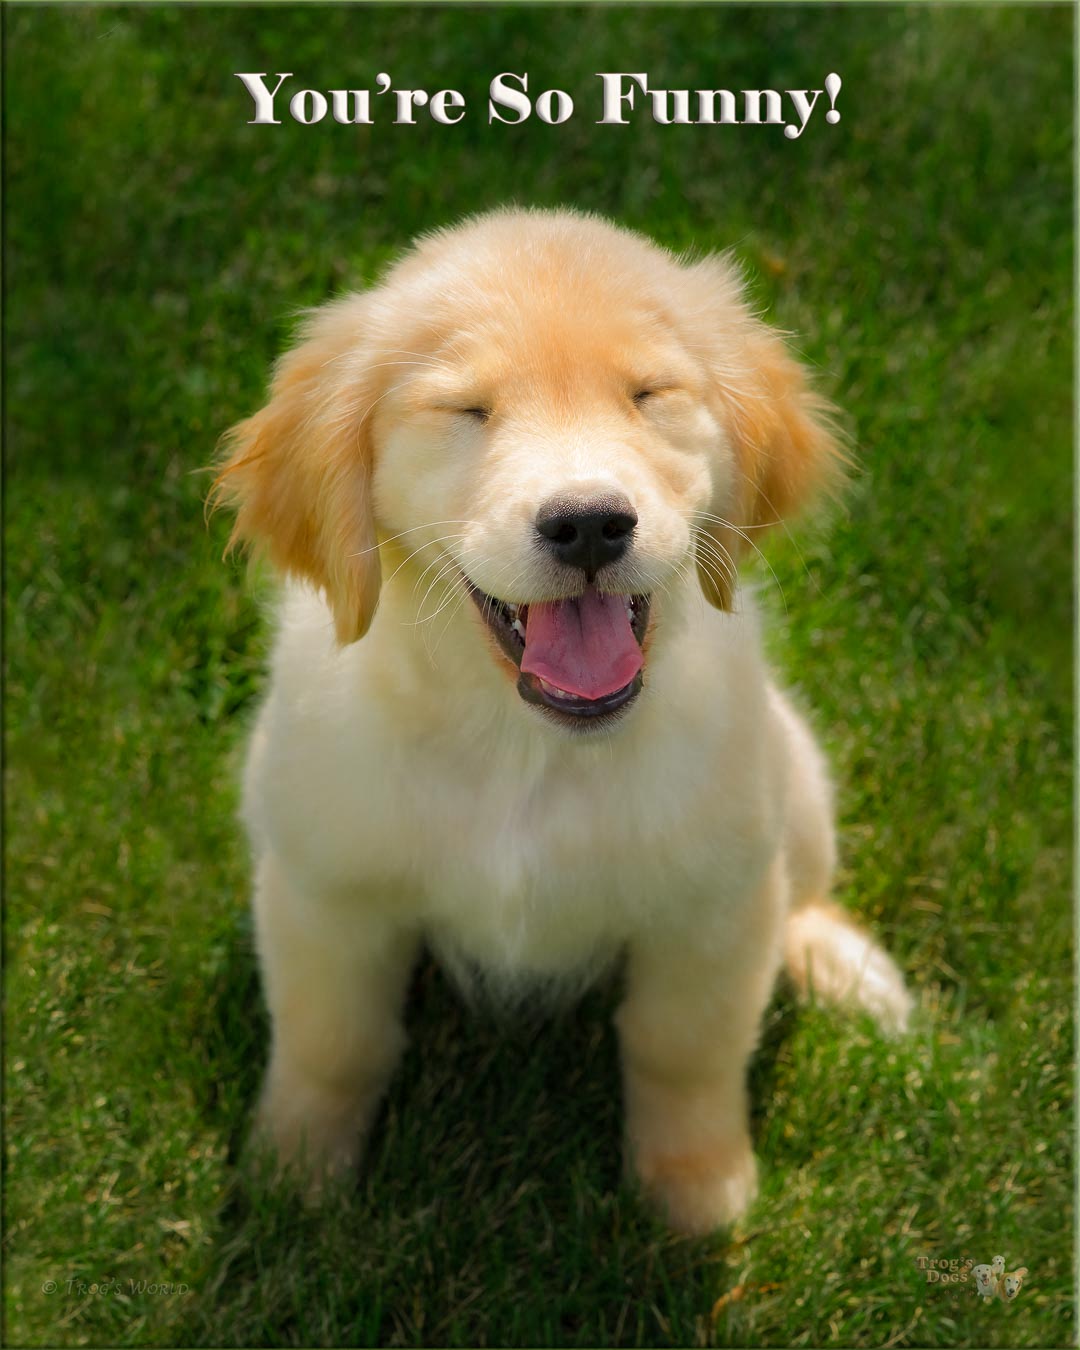 Golden Retriever Puppy Laughing and Grinning